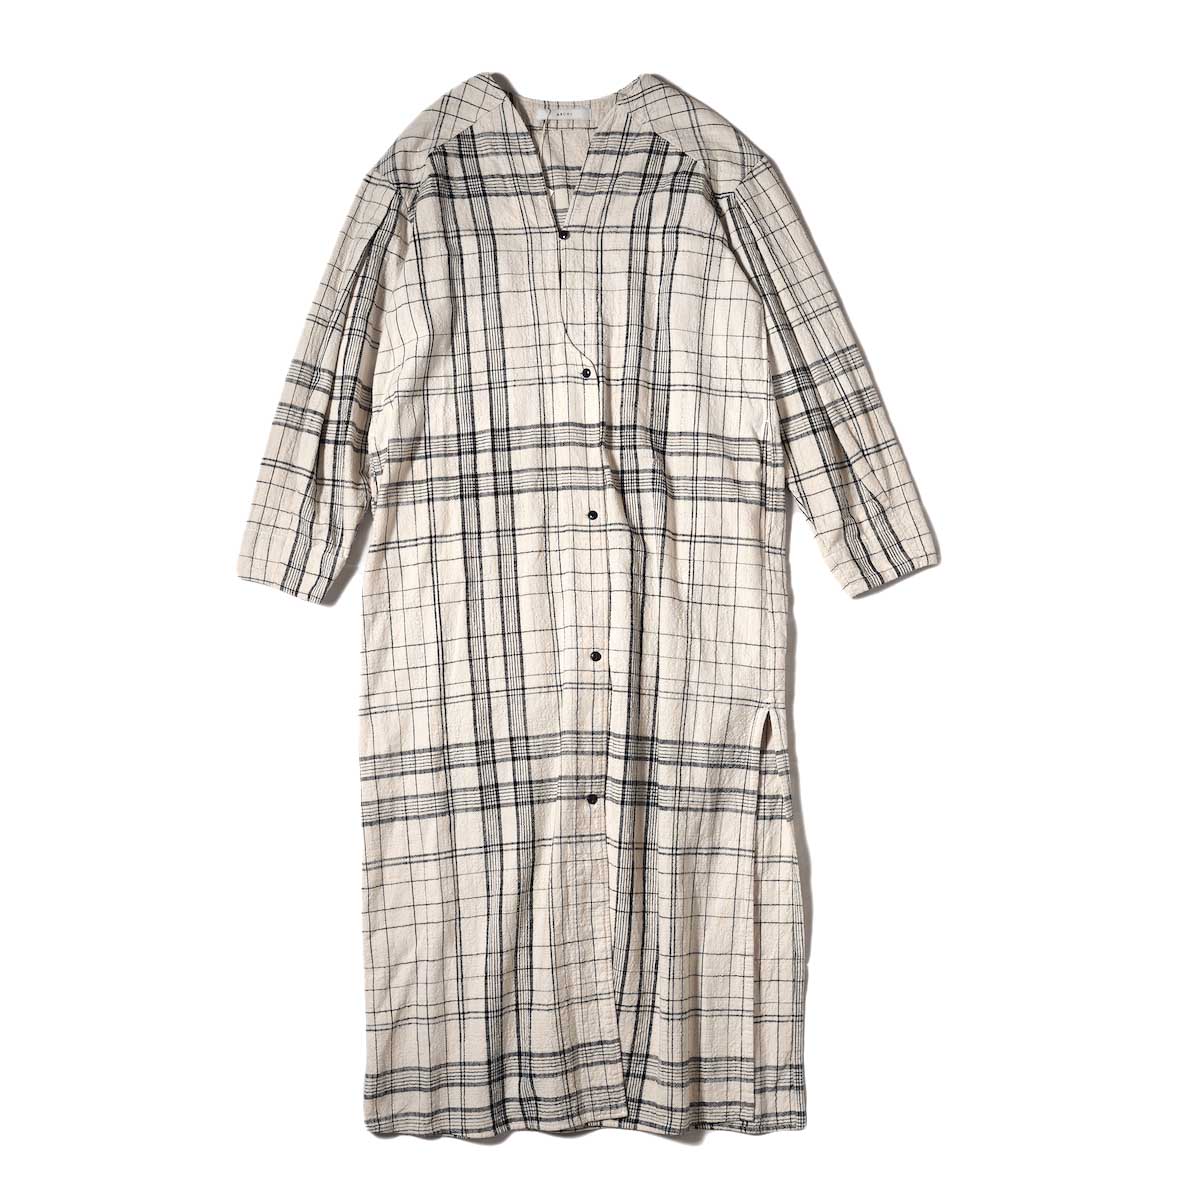 ARCHI / CHECKED SHIRTS GOWN (Natural)